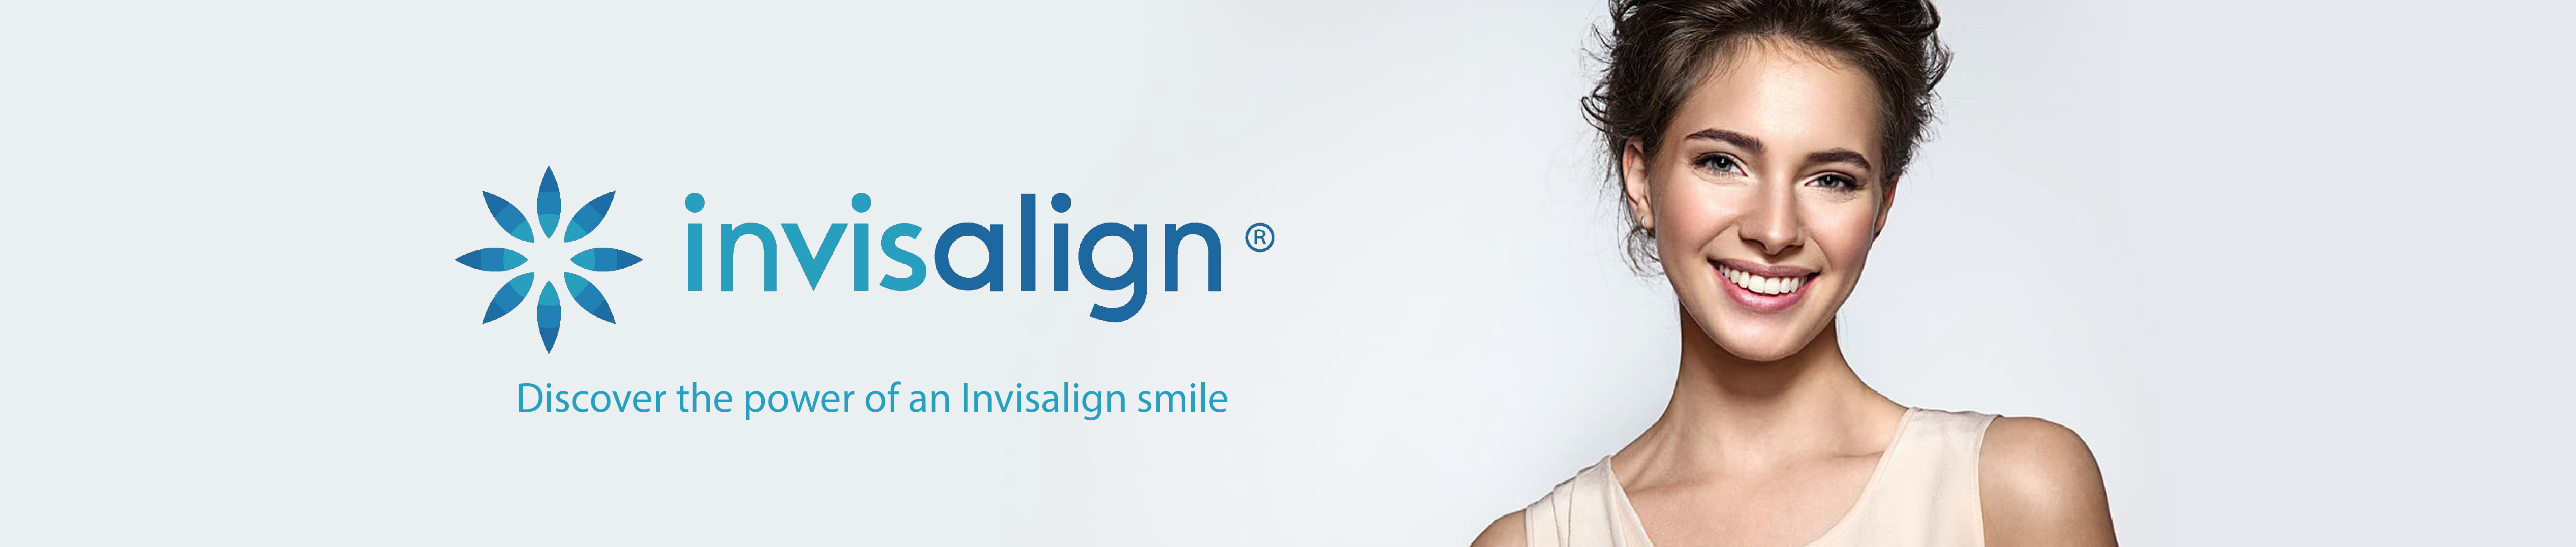 Discover the power of an Invisalign smile